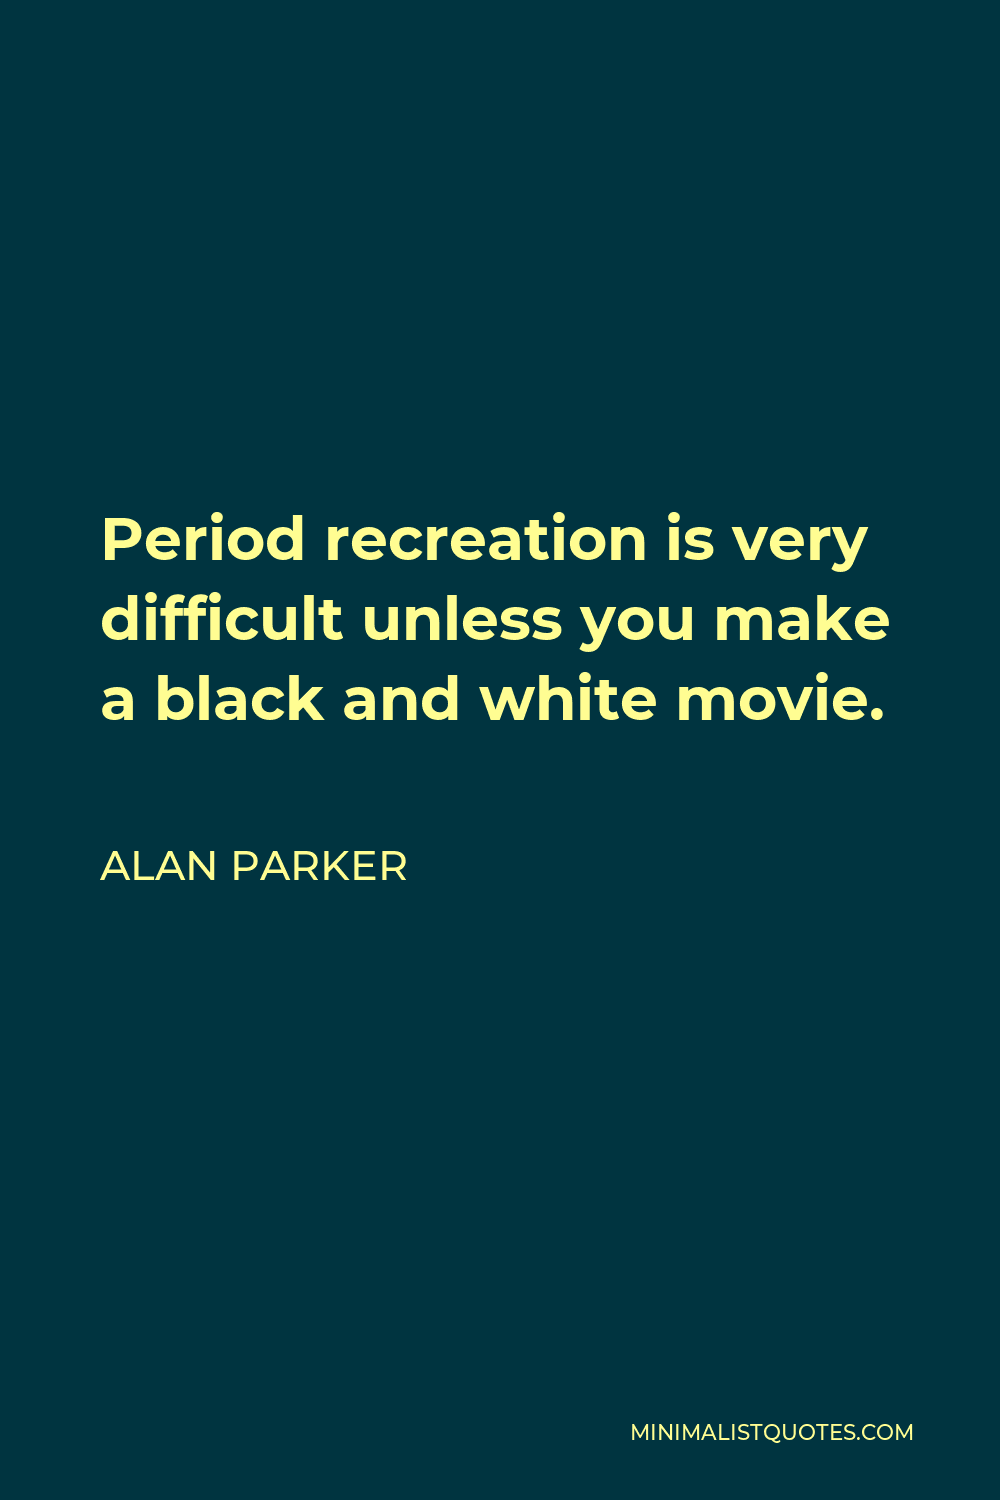 Alan Parker Quote - Period recreation is very difficult unless you make a black and white movie.